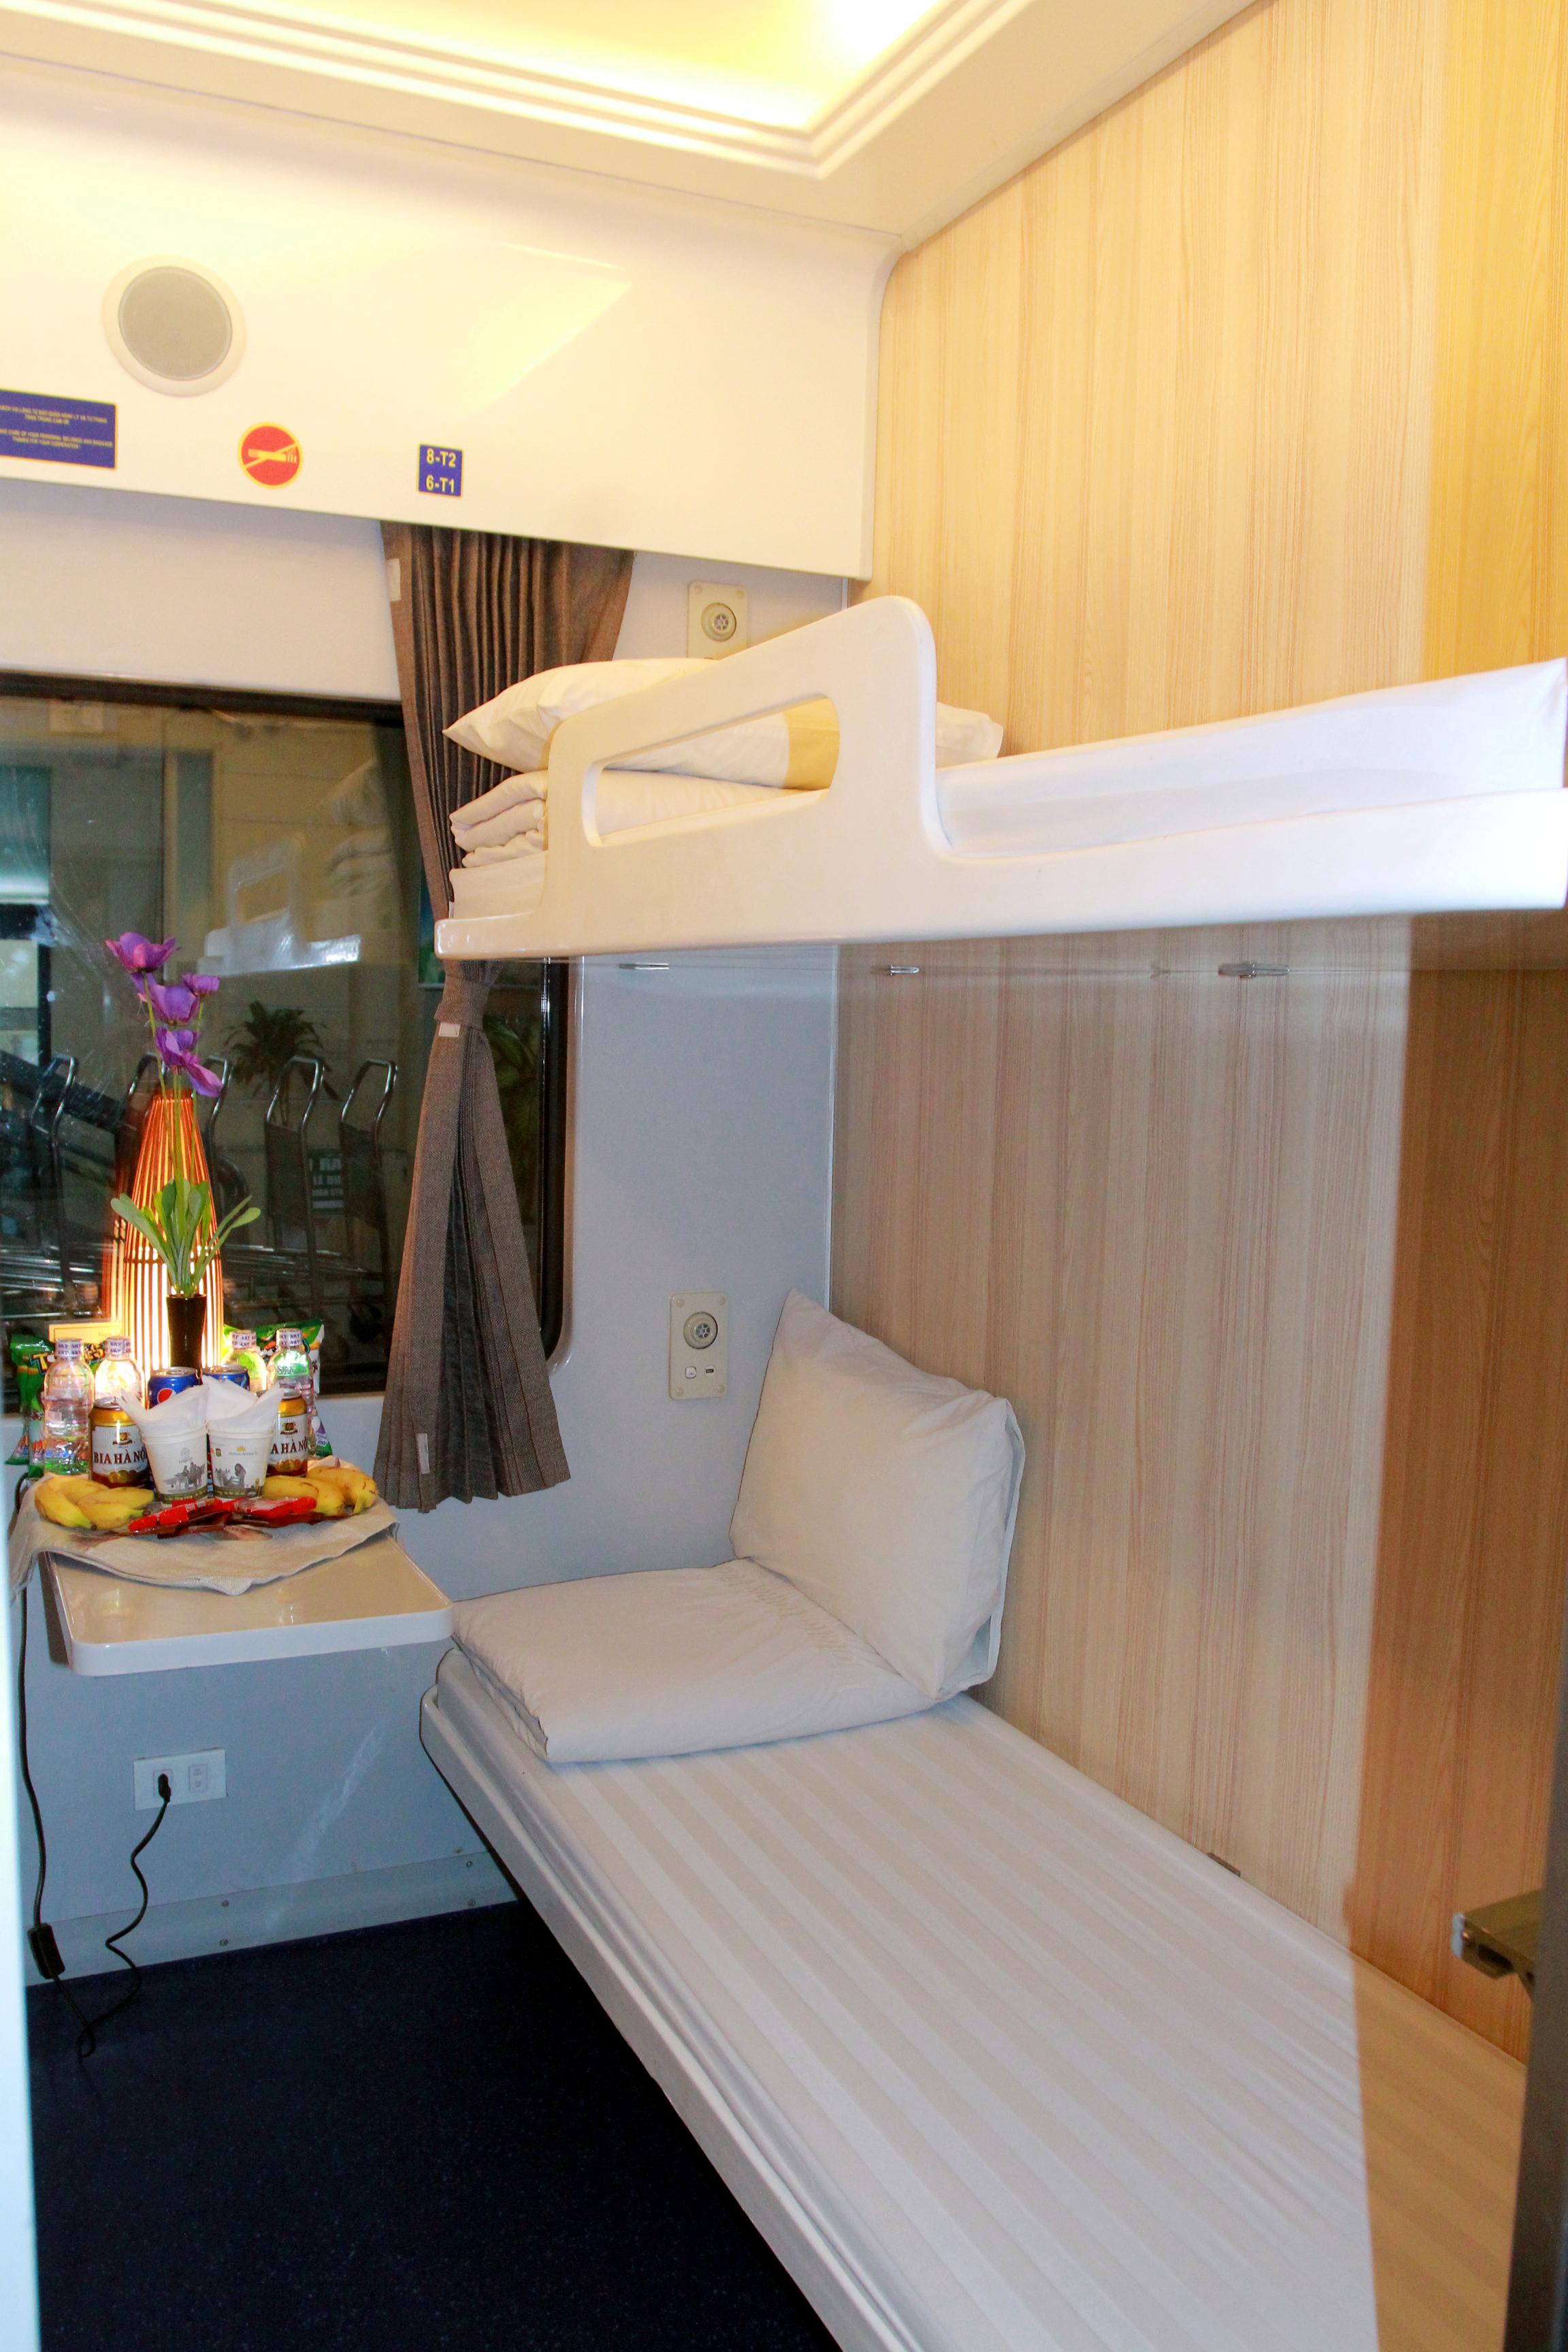 Hà Nội – Huế on SE3 (19h25 – 08h55)  (Deluxe 4 Berths Cabin, One Way)